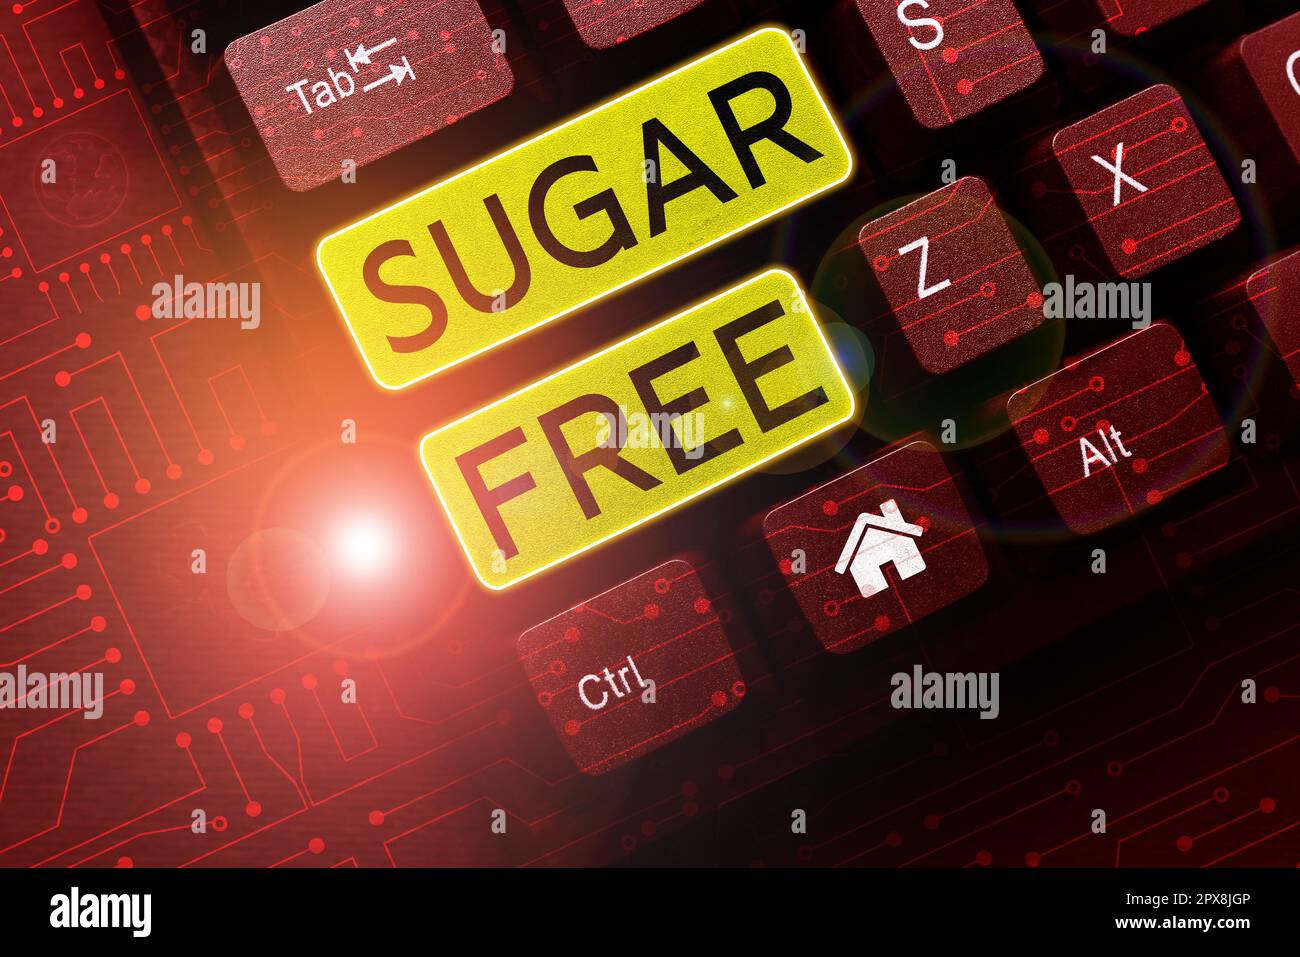 Sign displaying Sugar Free, Word for containing an artificial sweetening substance instead of sugar Stock Photo